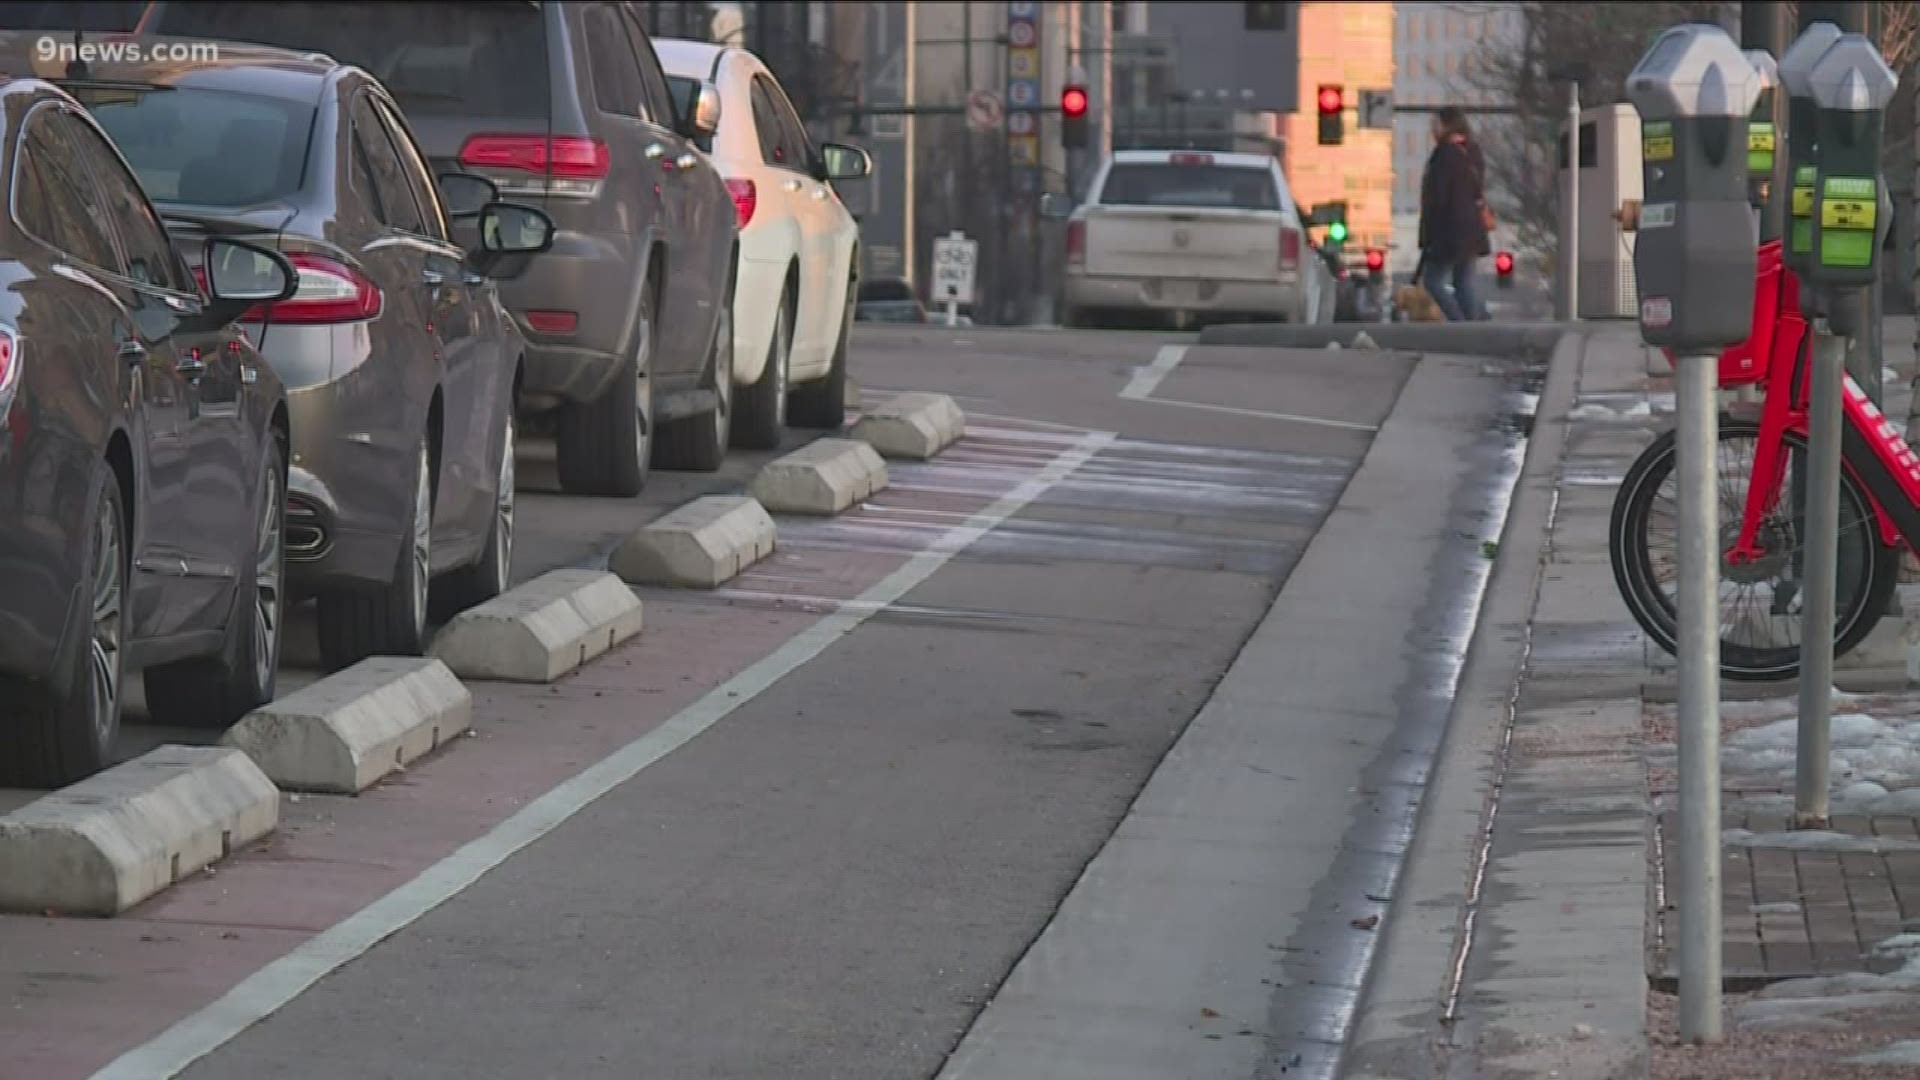 The city of Denver said a survey showed 60% of Denverites are interested in riding a bicycle but have safety concerns.